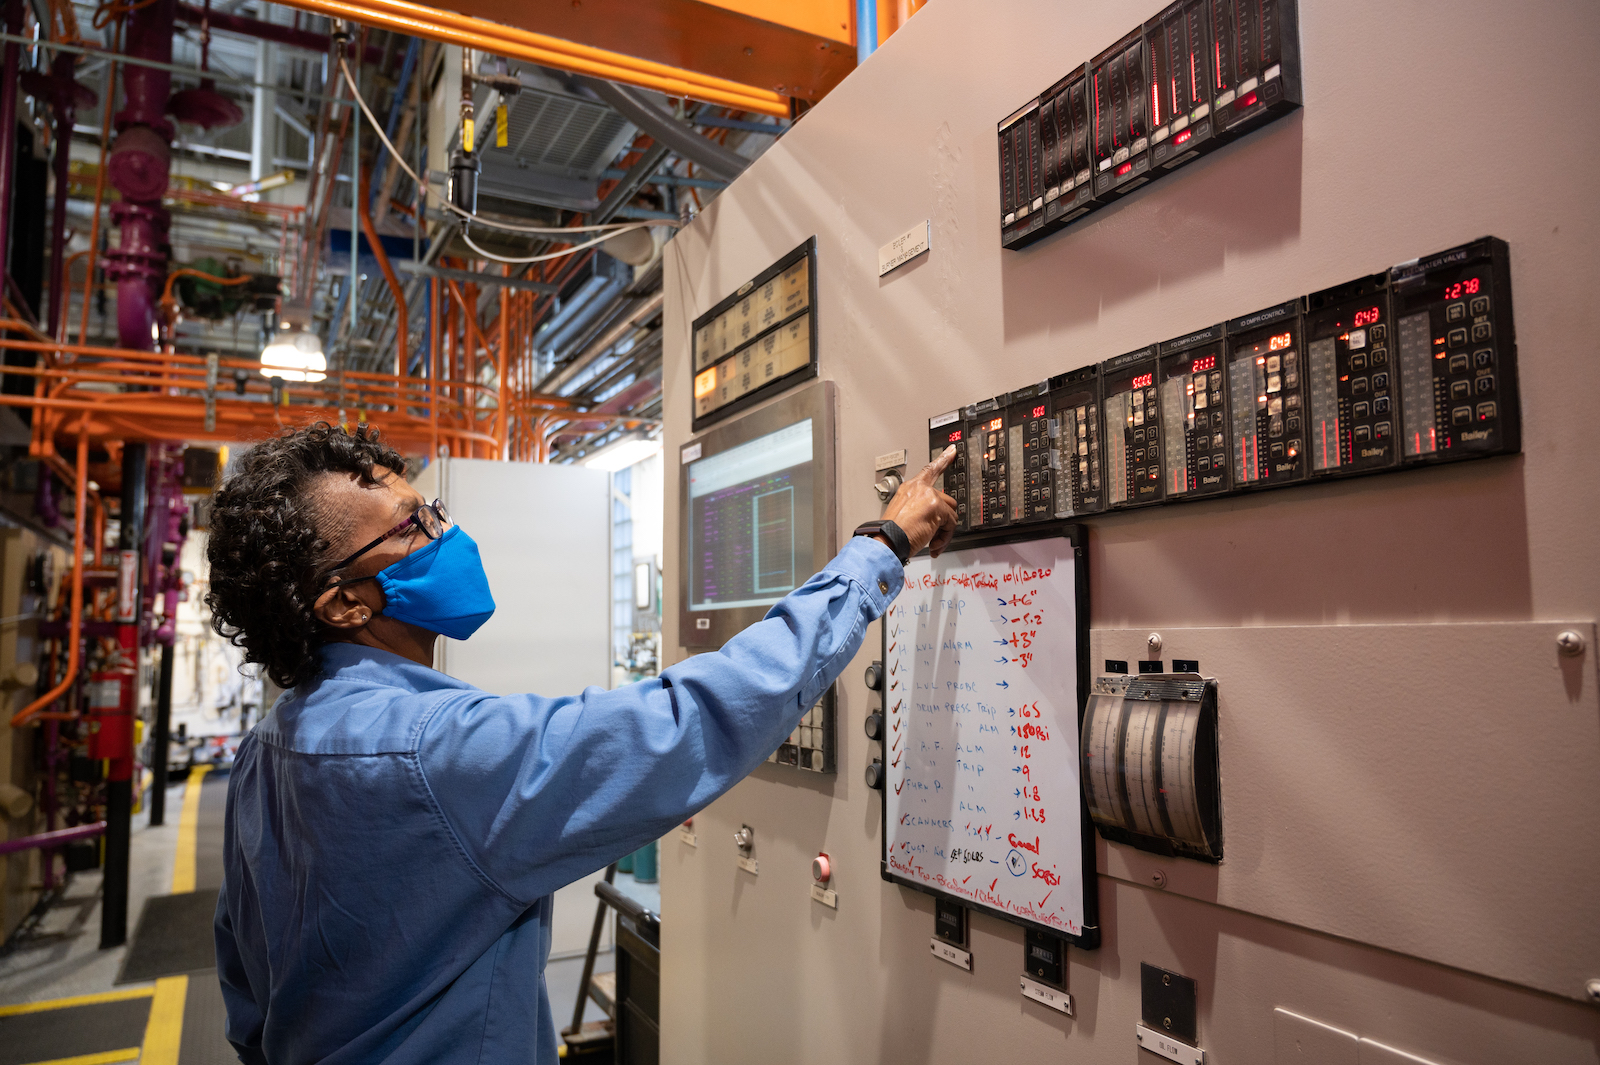 Valerie Edward, a stationary engineer, is technically trained to operate, troubleshoot, and oversee the Holland Plant's industrial equipment. (Photo by Allison Carter)